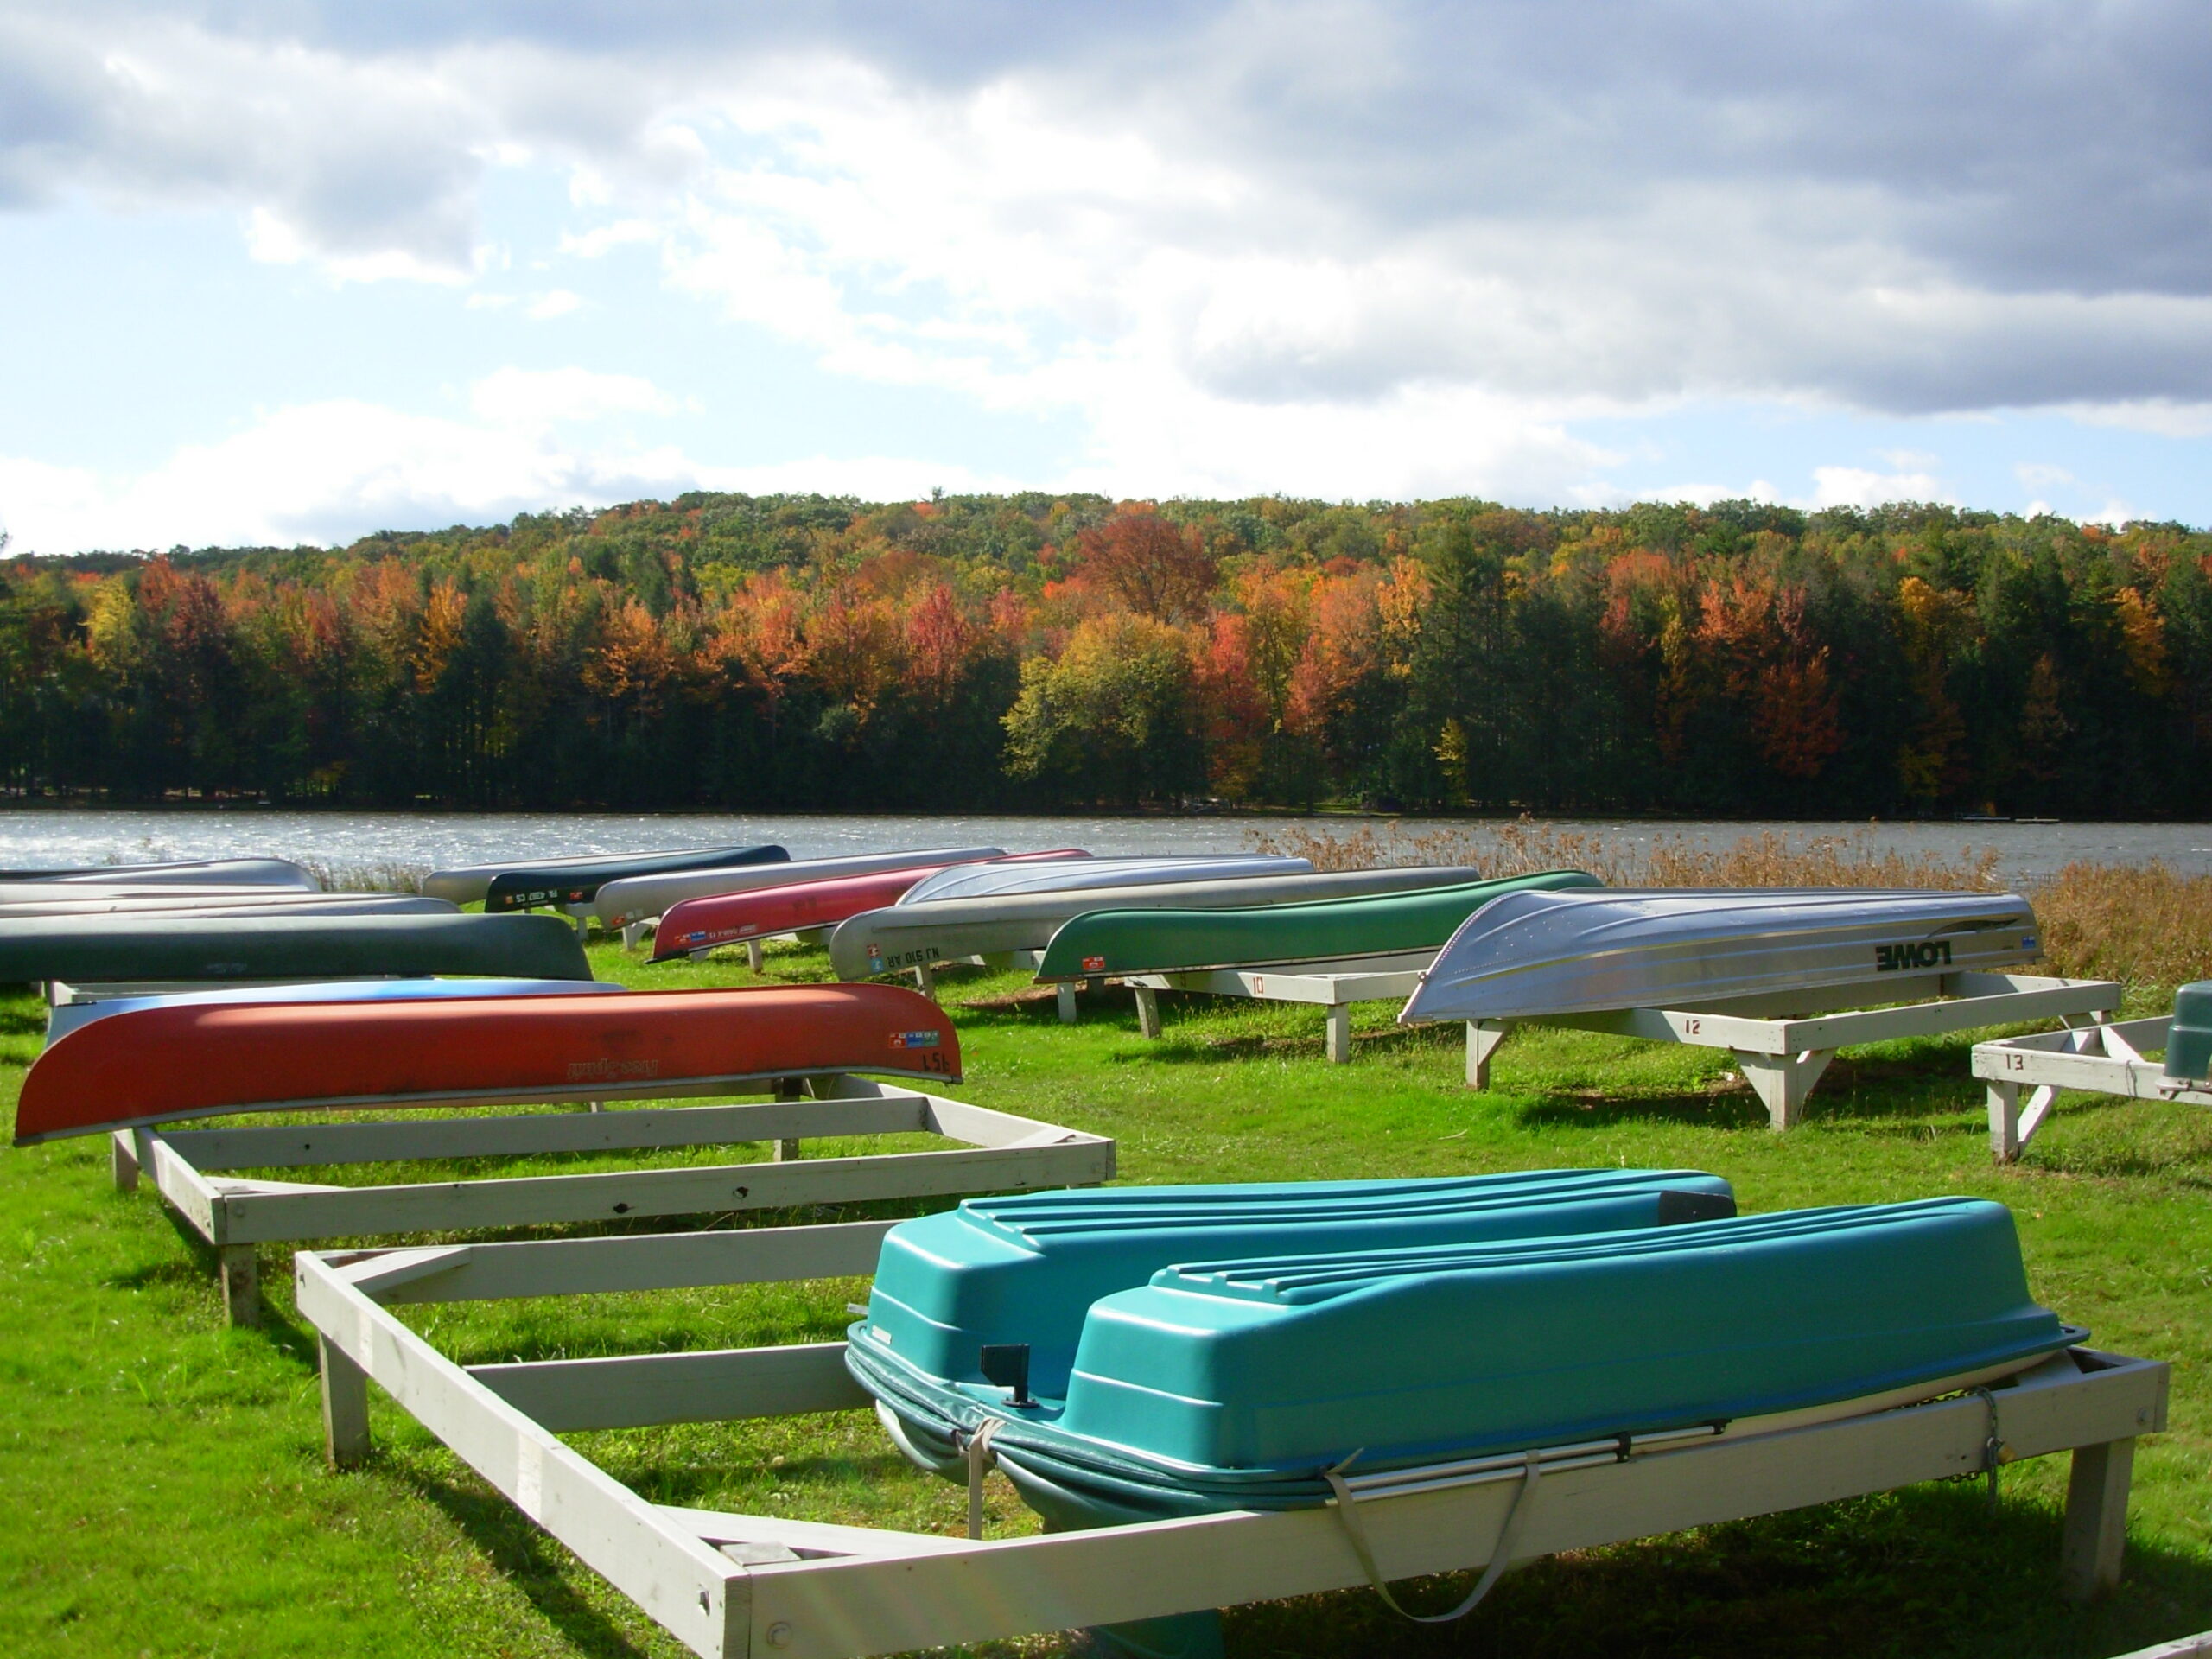 Canoes and paddle boats on the shore of a lake with fall foliage in the background